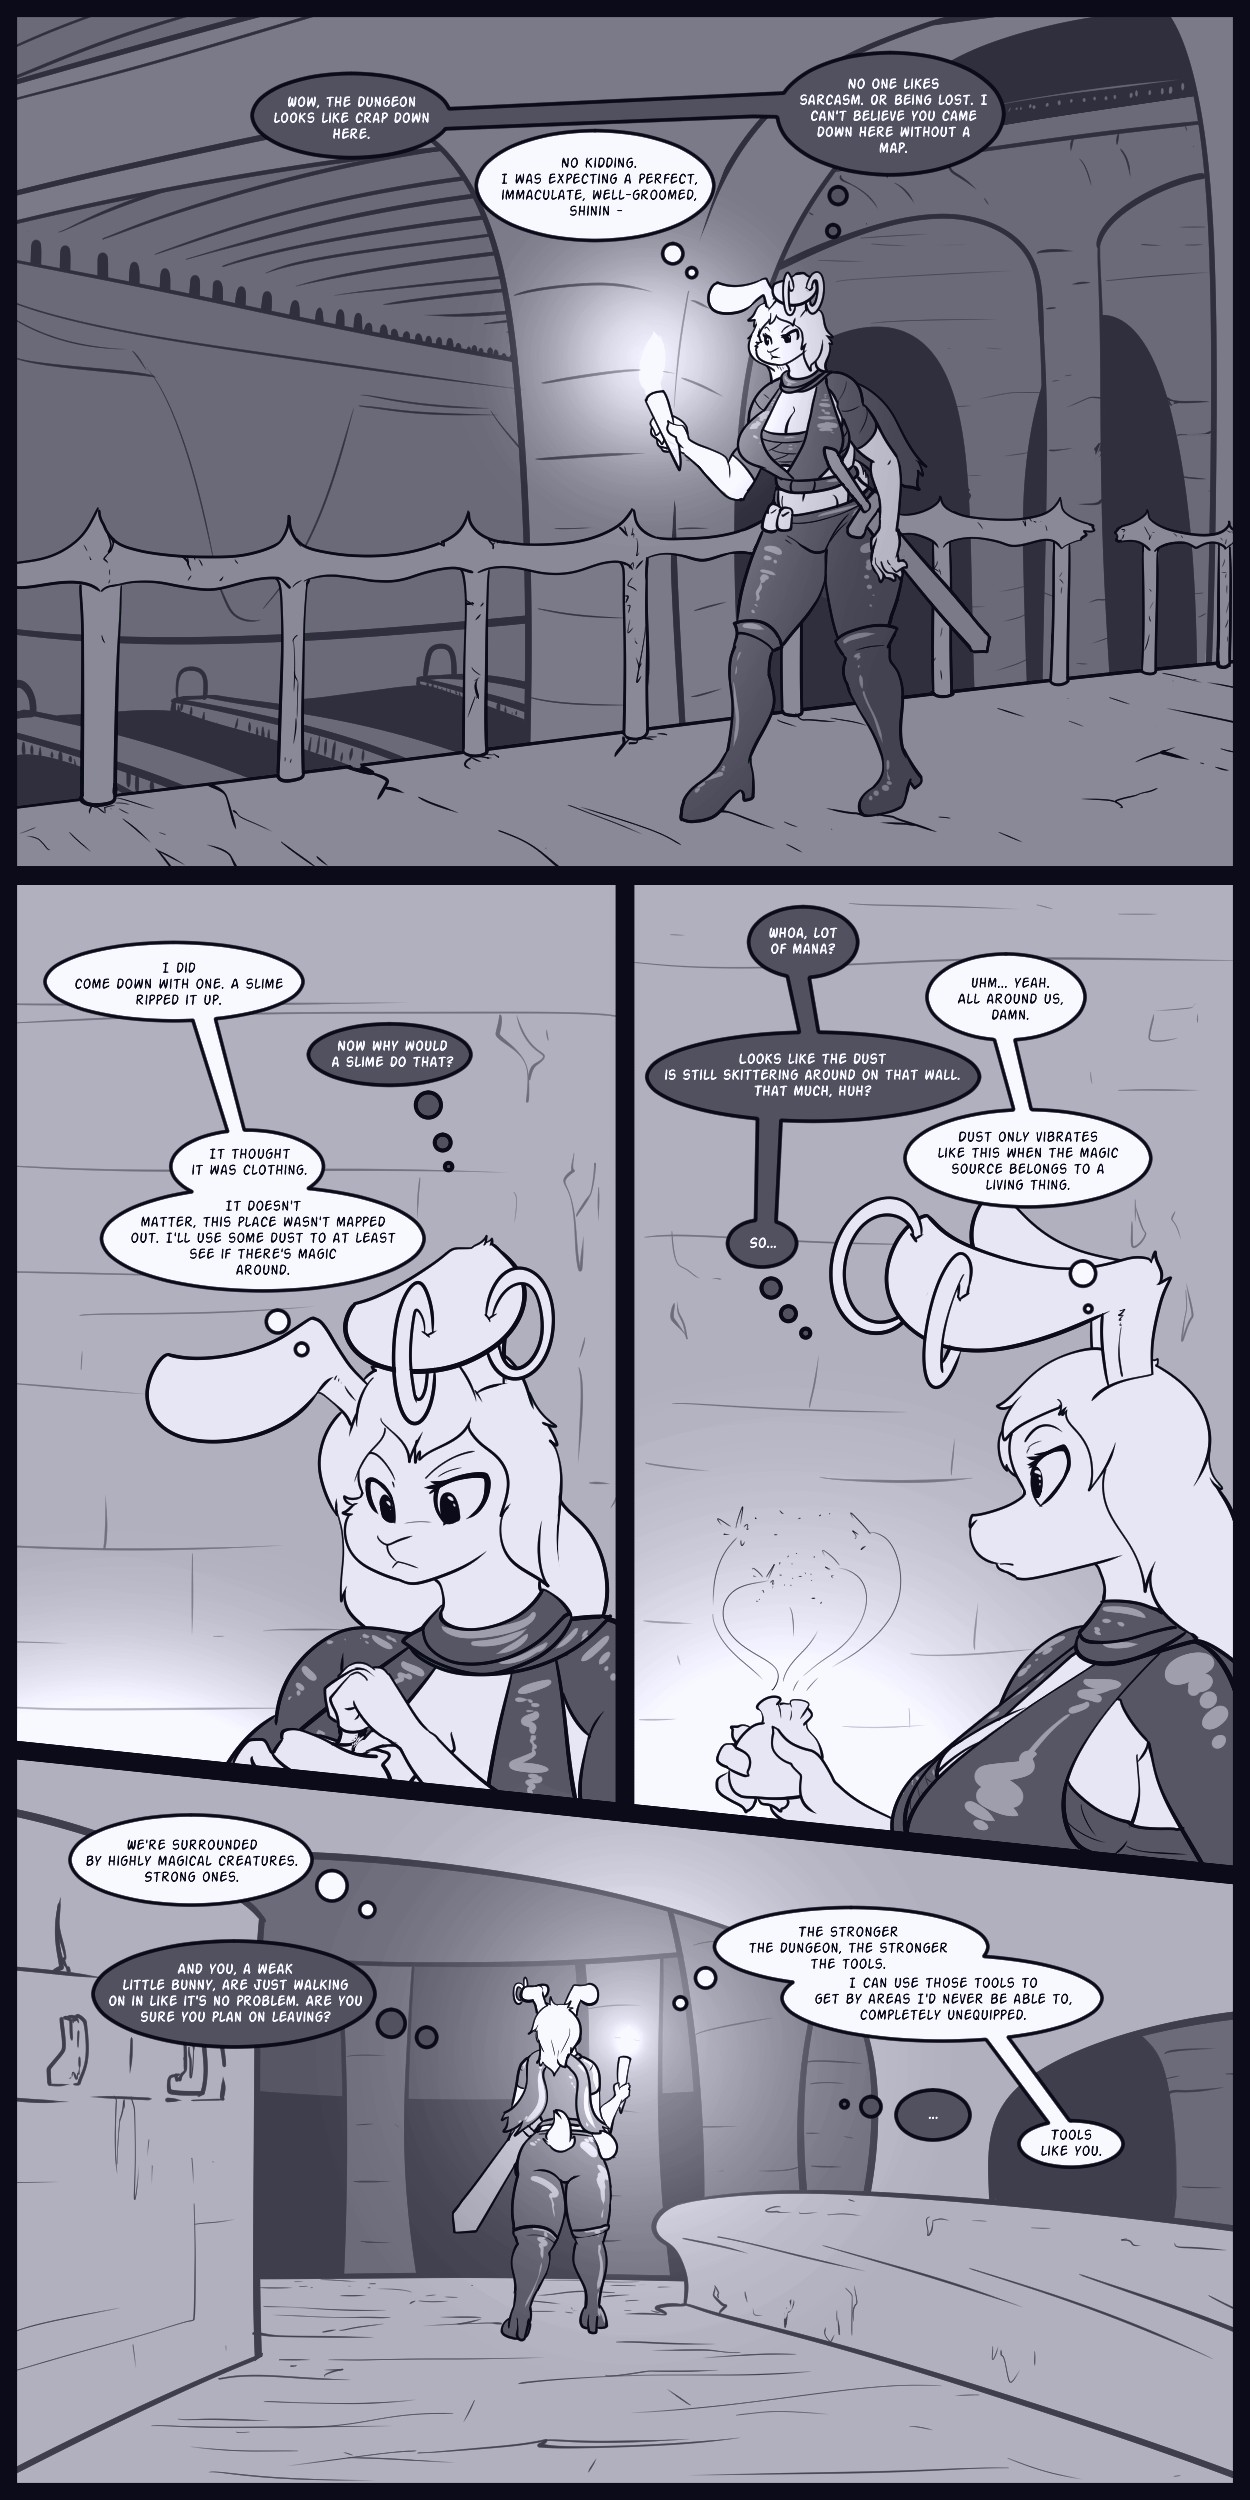 Rough Situation 2 page 02